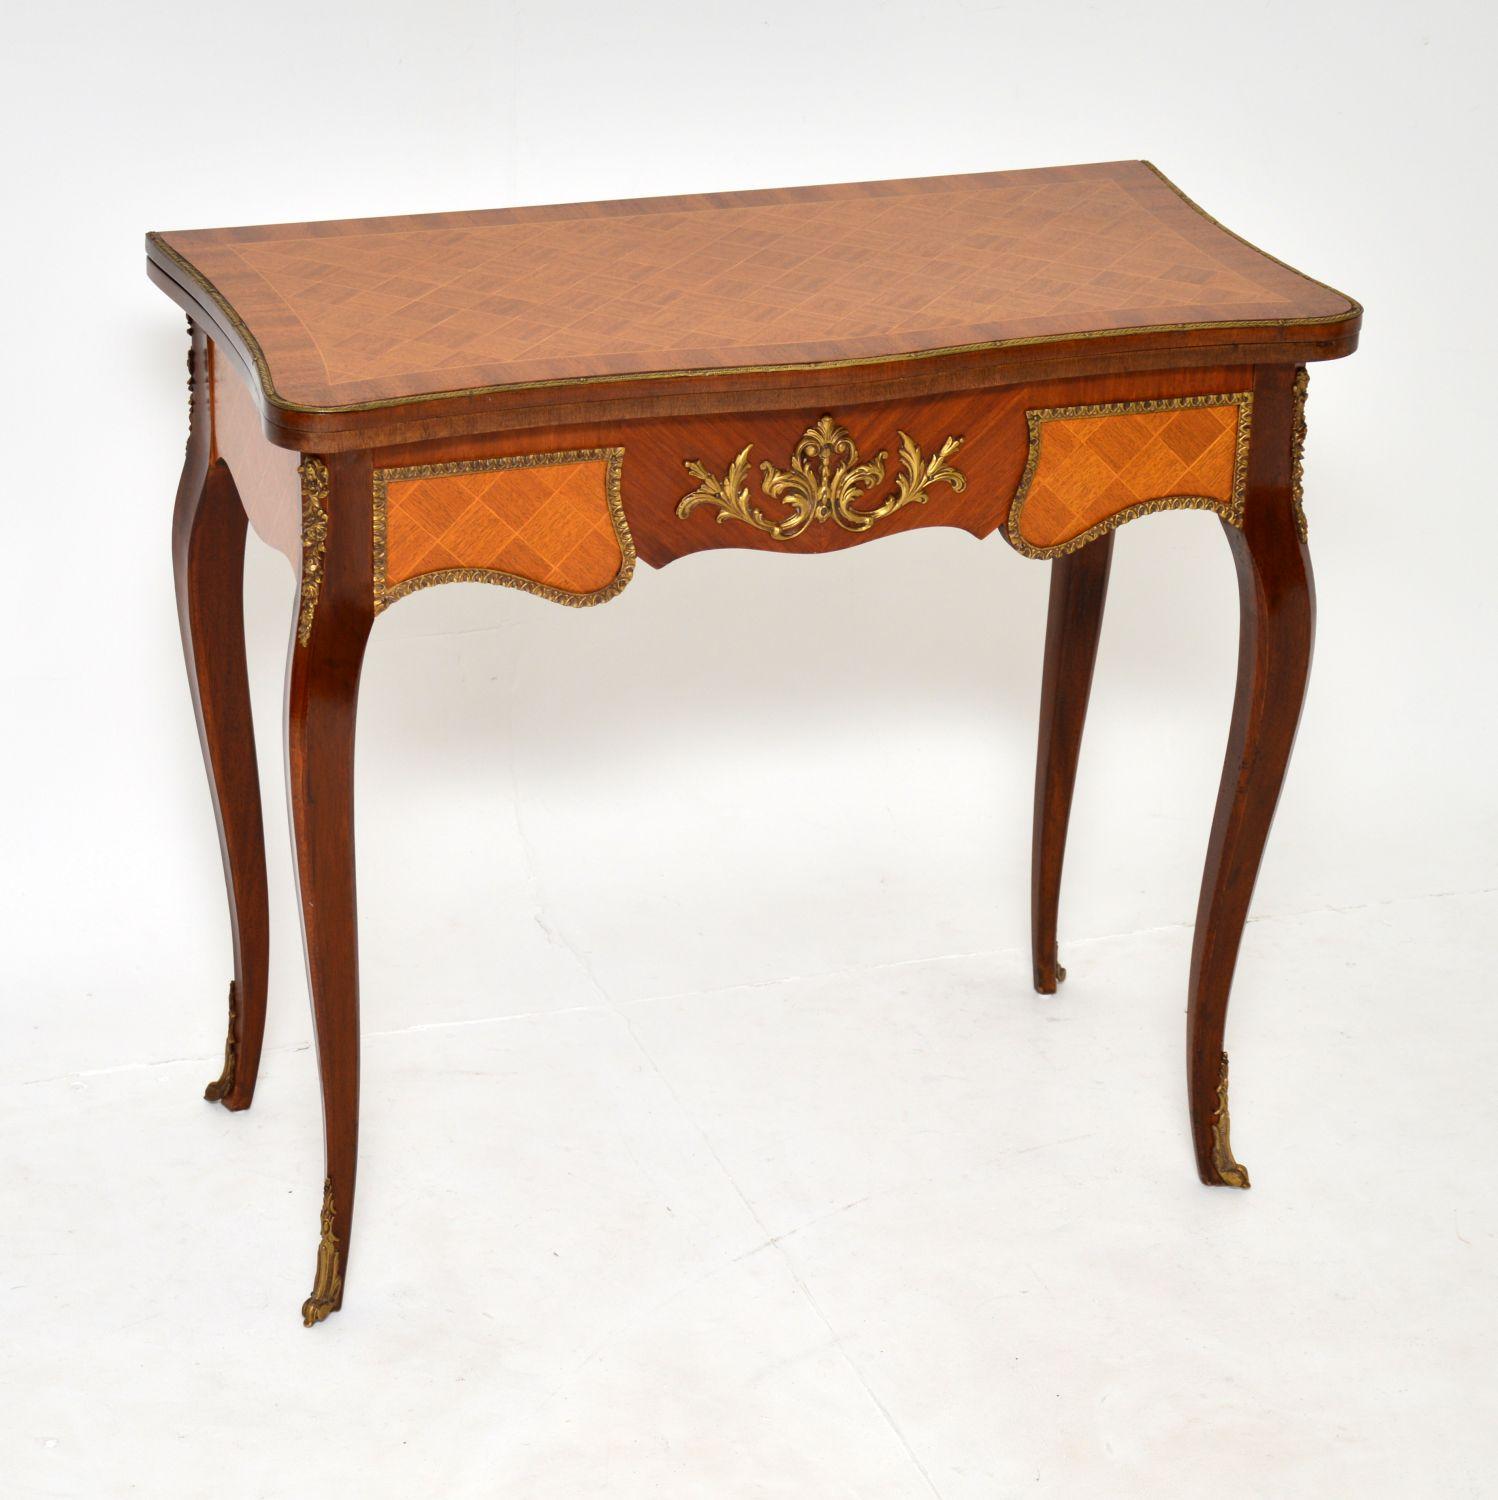 A beautiful and elegant antique French style inlaid parquetry card table, dating from around the 1930’s period.

The quality is fantastic and this has a very clever design. The top swivels and unfolds to reveal a green baize playing surface. There